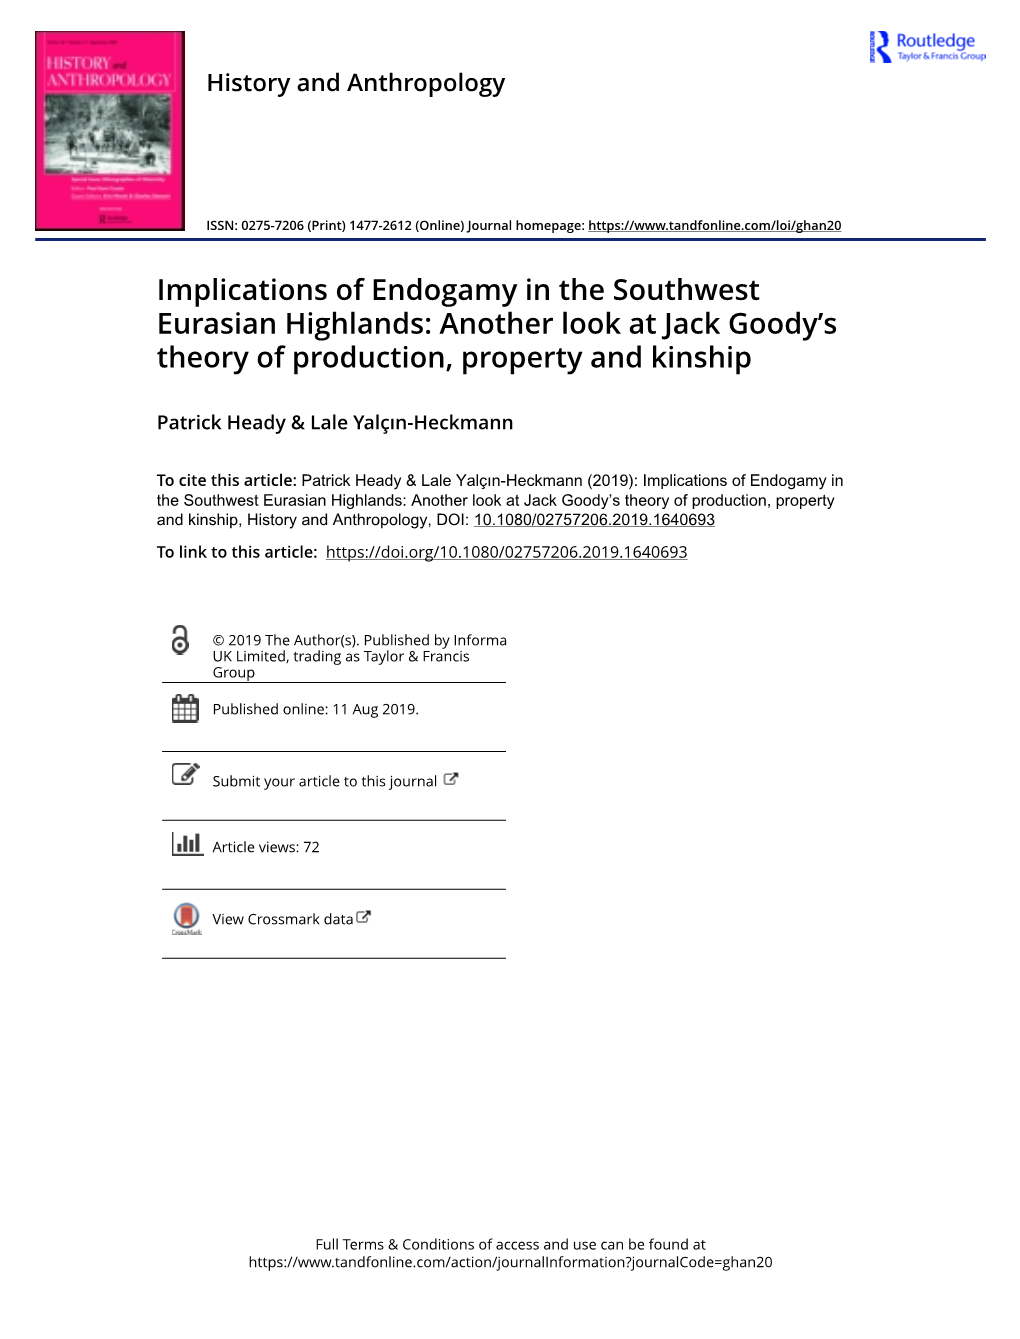 Implications of Endogamy in the Southwest Eurasian Highlands: Another Look at Jack Goody’S Theory of Production, Property and Kinship